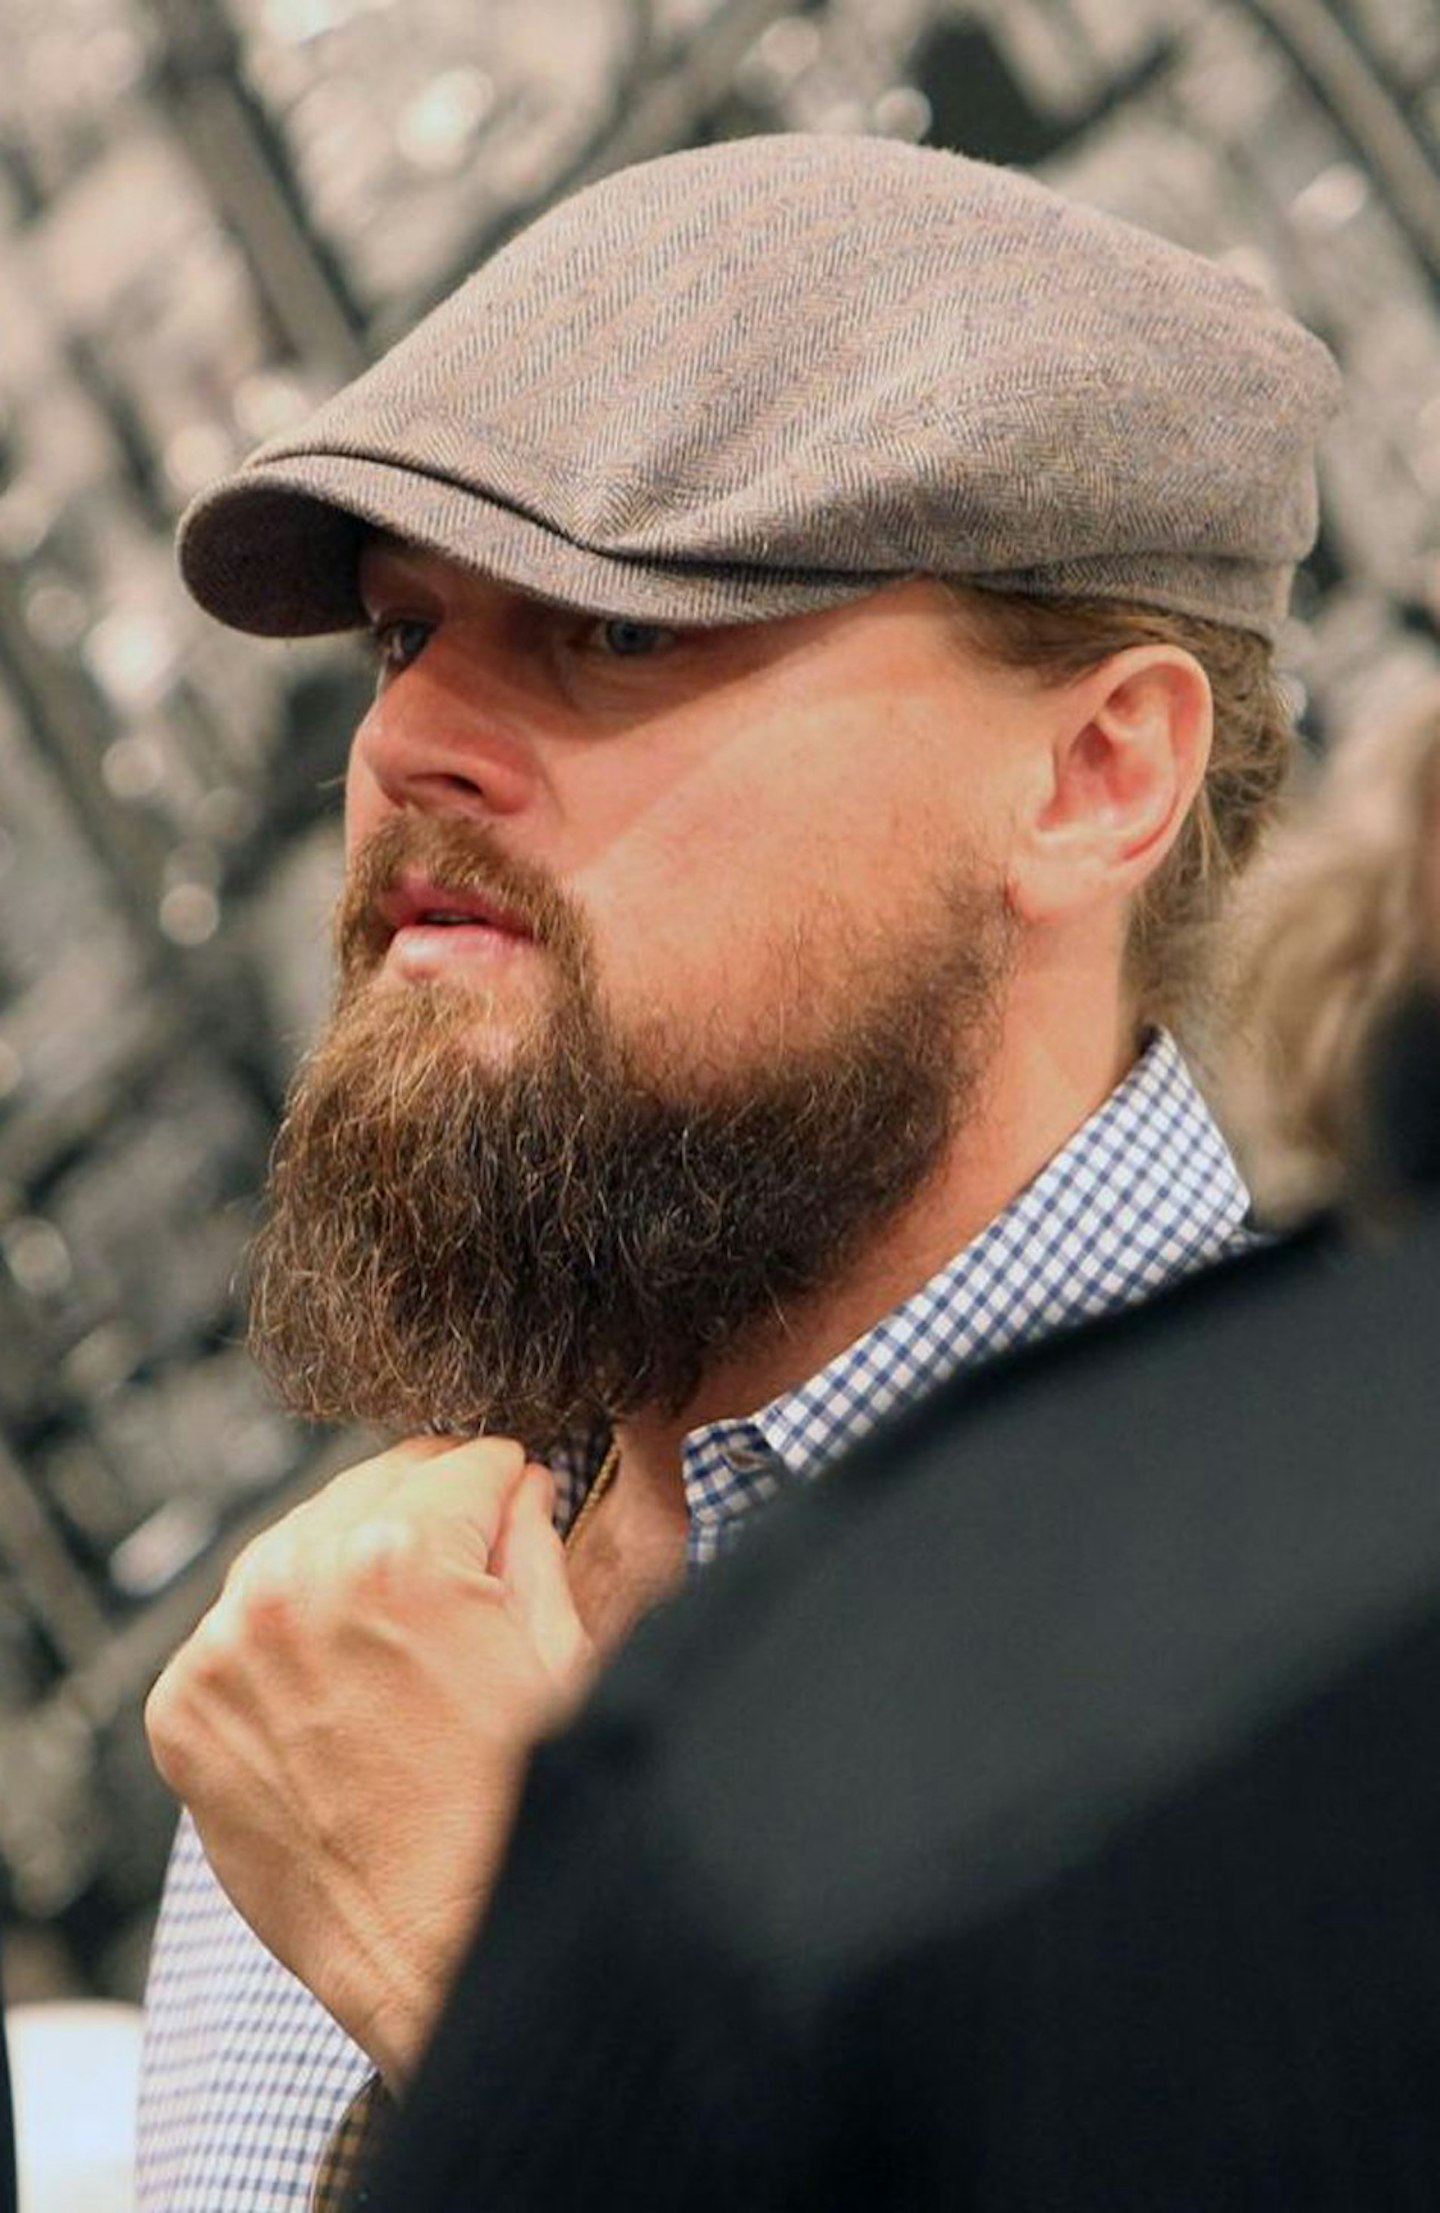 We see you playing with your beard Leo, does Rihanna like it too?